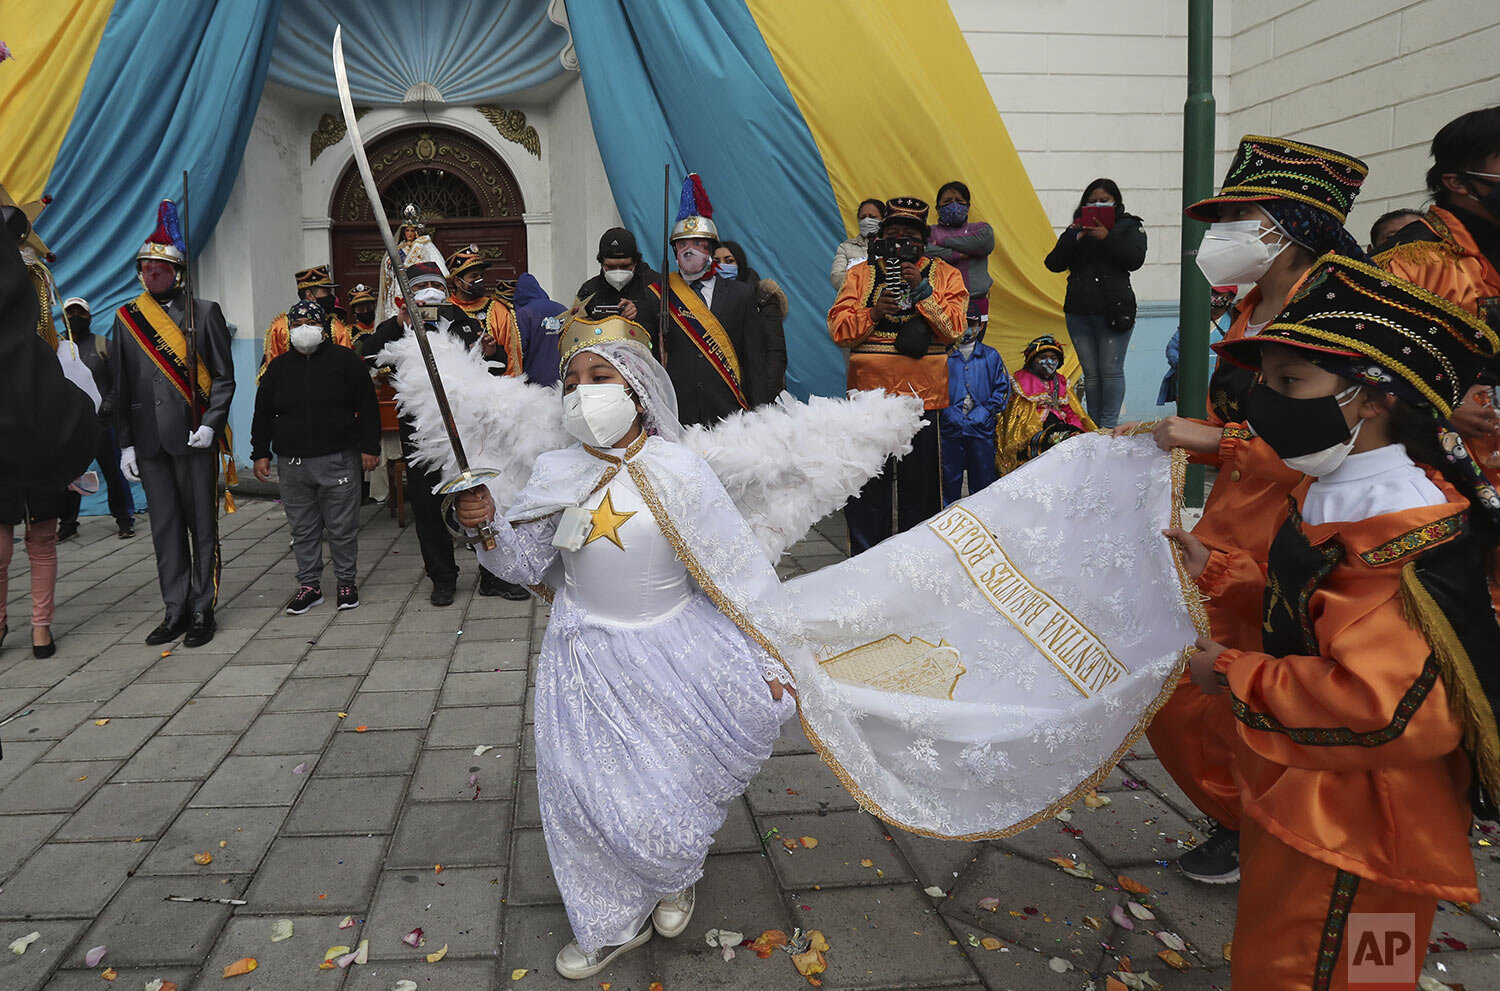  A character typical of the Mama Negra festival dances with a sword in honor of the Virgin of Las Mercedes in Latacunga, Ecuador, Sept. 24, 2020. The  festival dates back to 1742 when the people of Latacunga ask the Virgin to protect them from the er